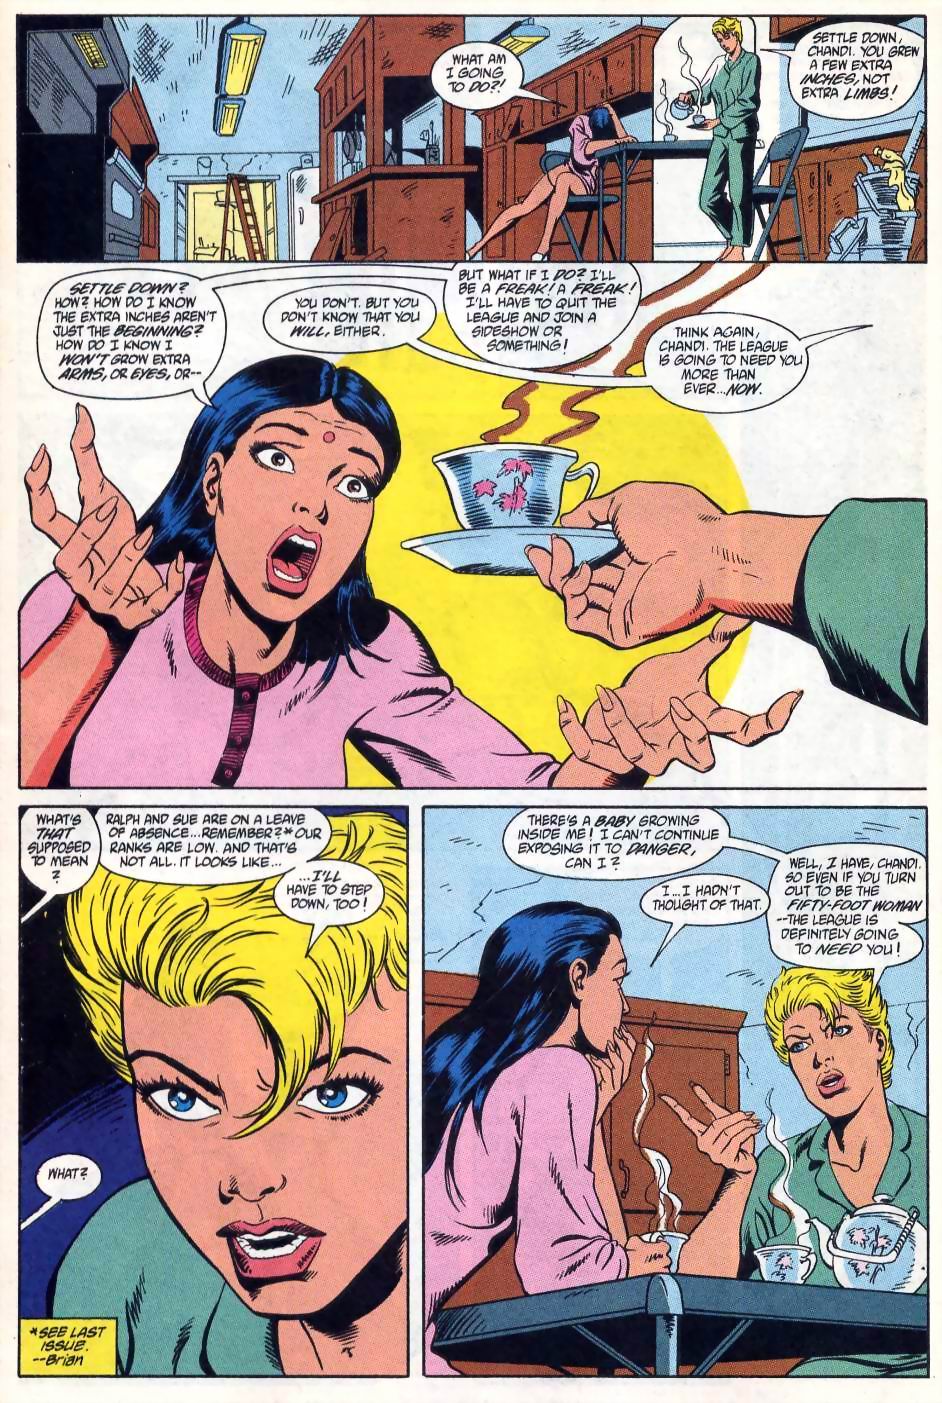 Justice League International (1993) 58 Page 11